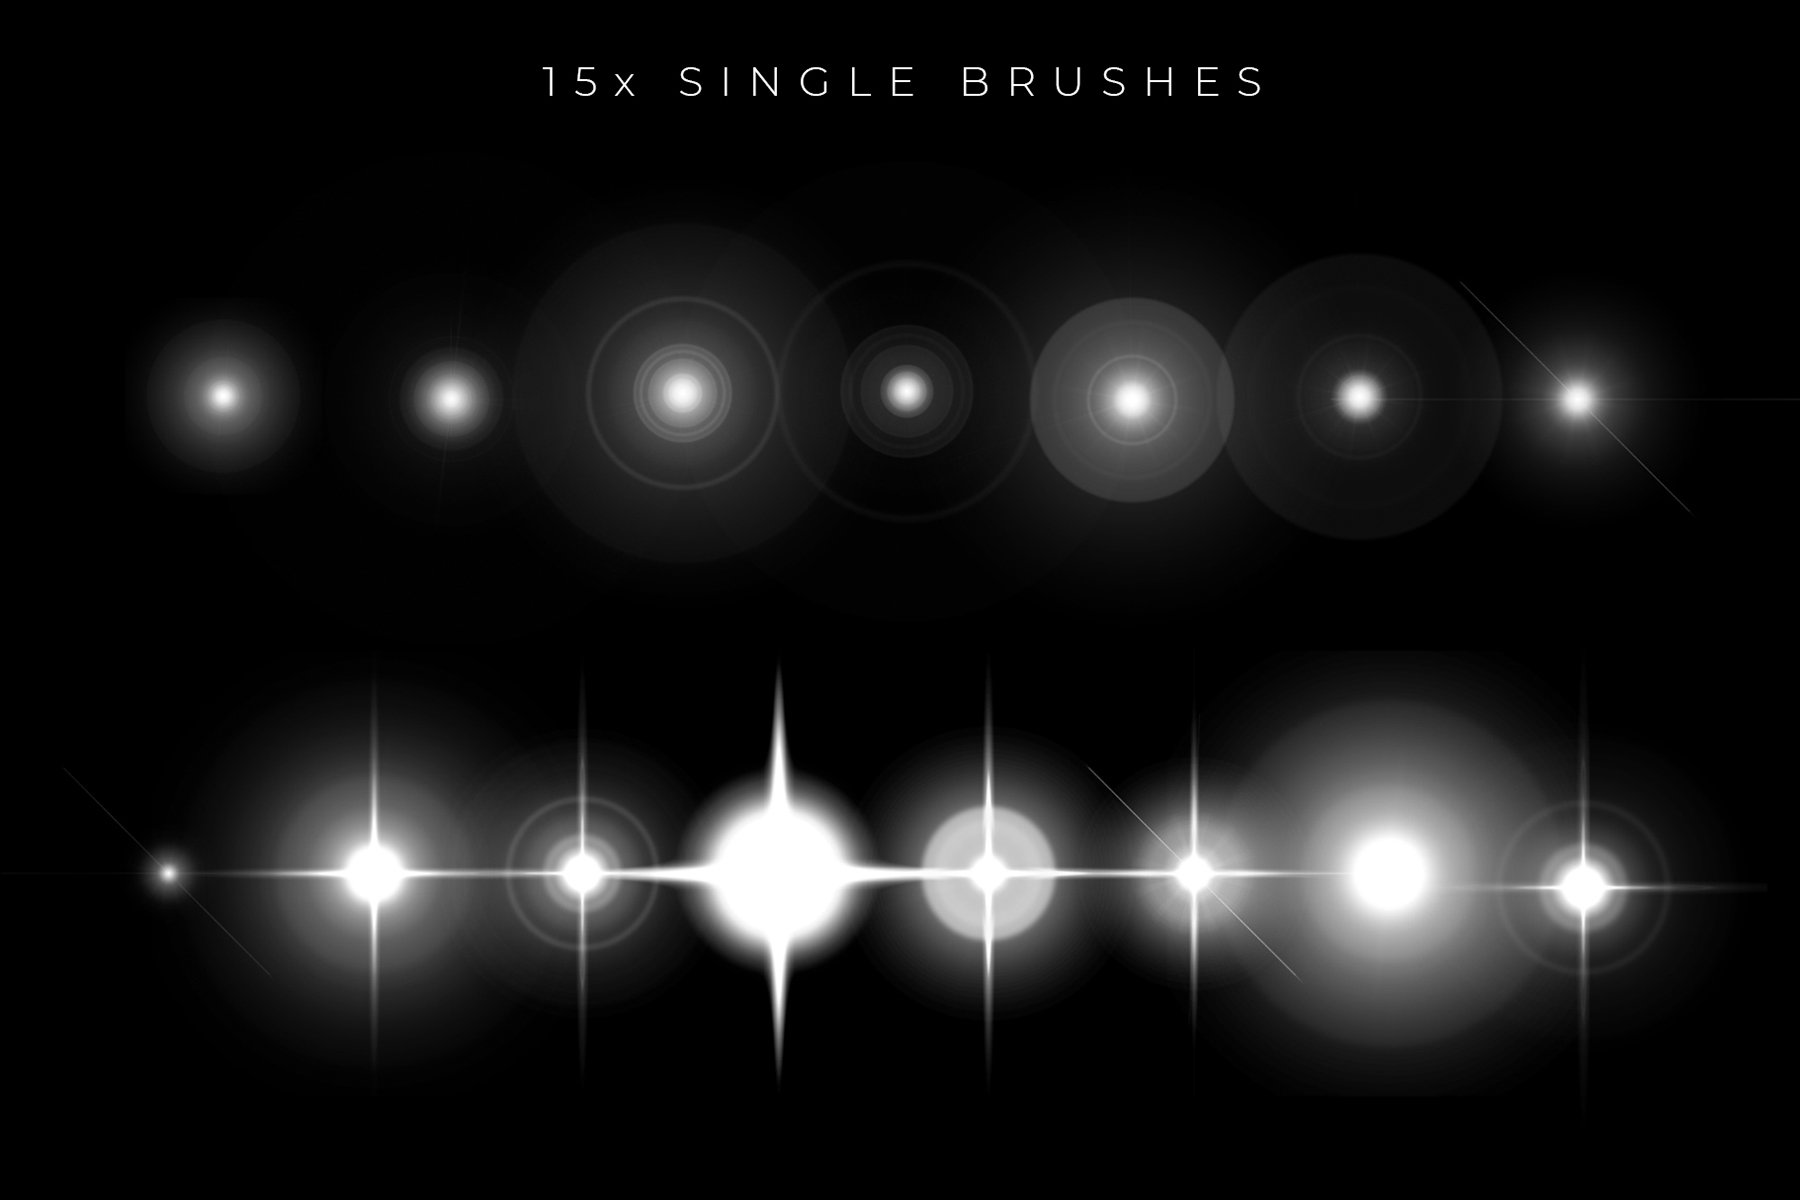 20 star brushes ad 2 412